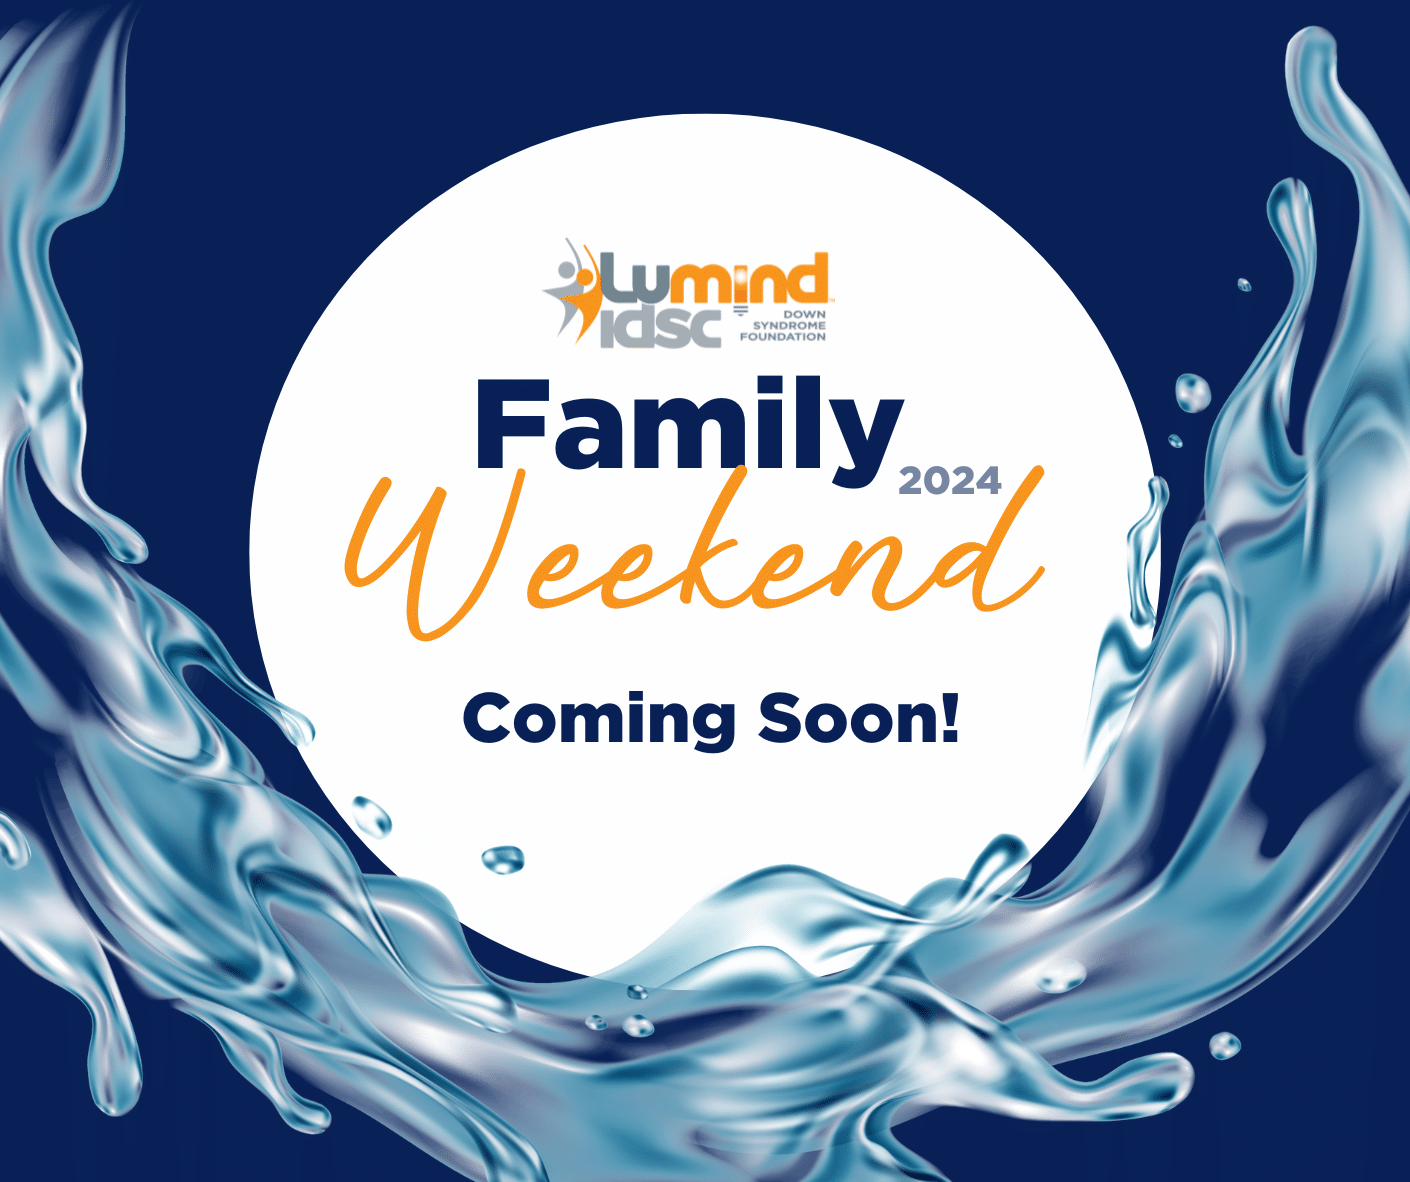 Annual Family Weekend LuMind IDSC Foundation